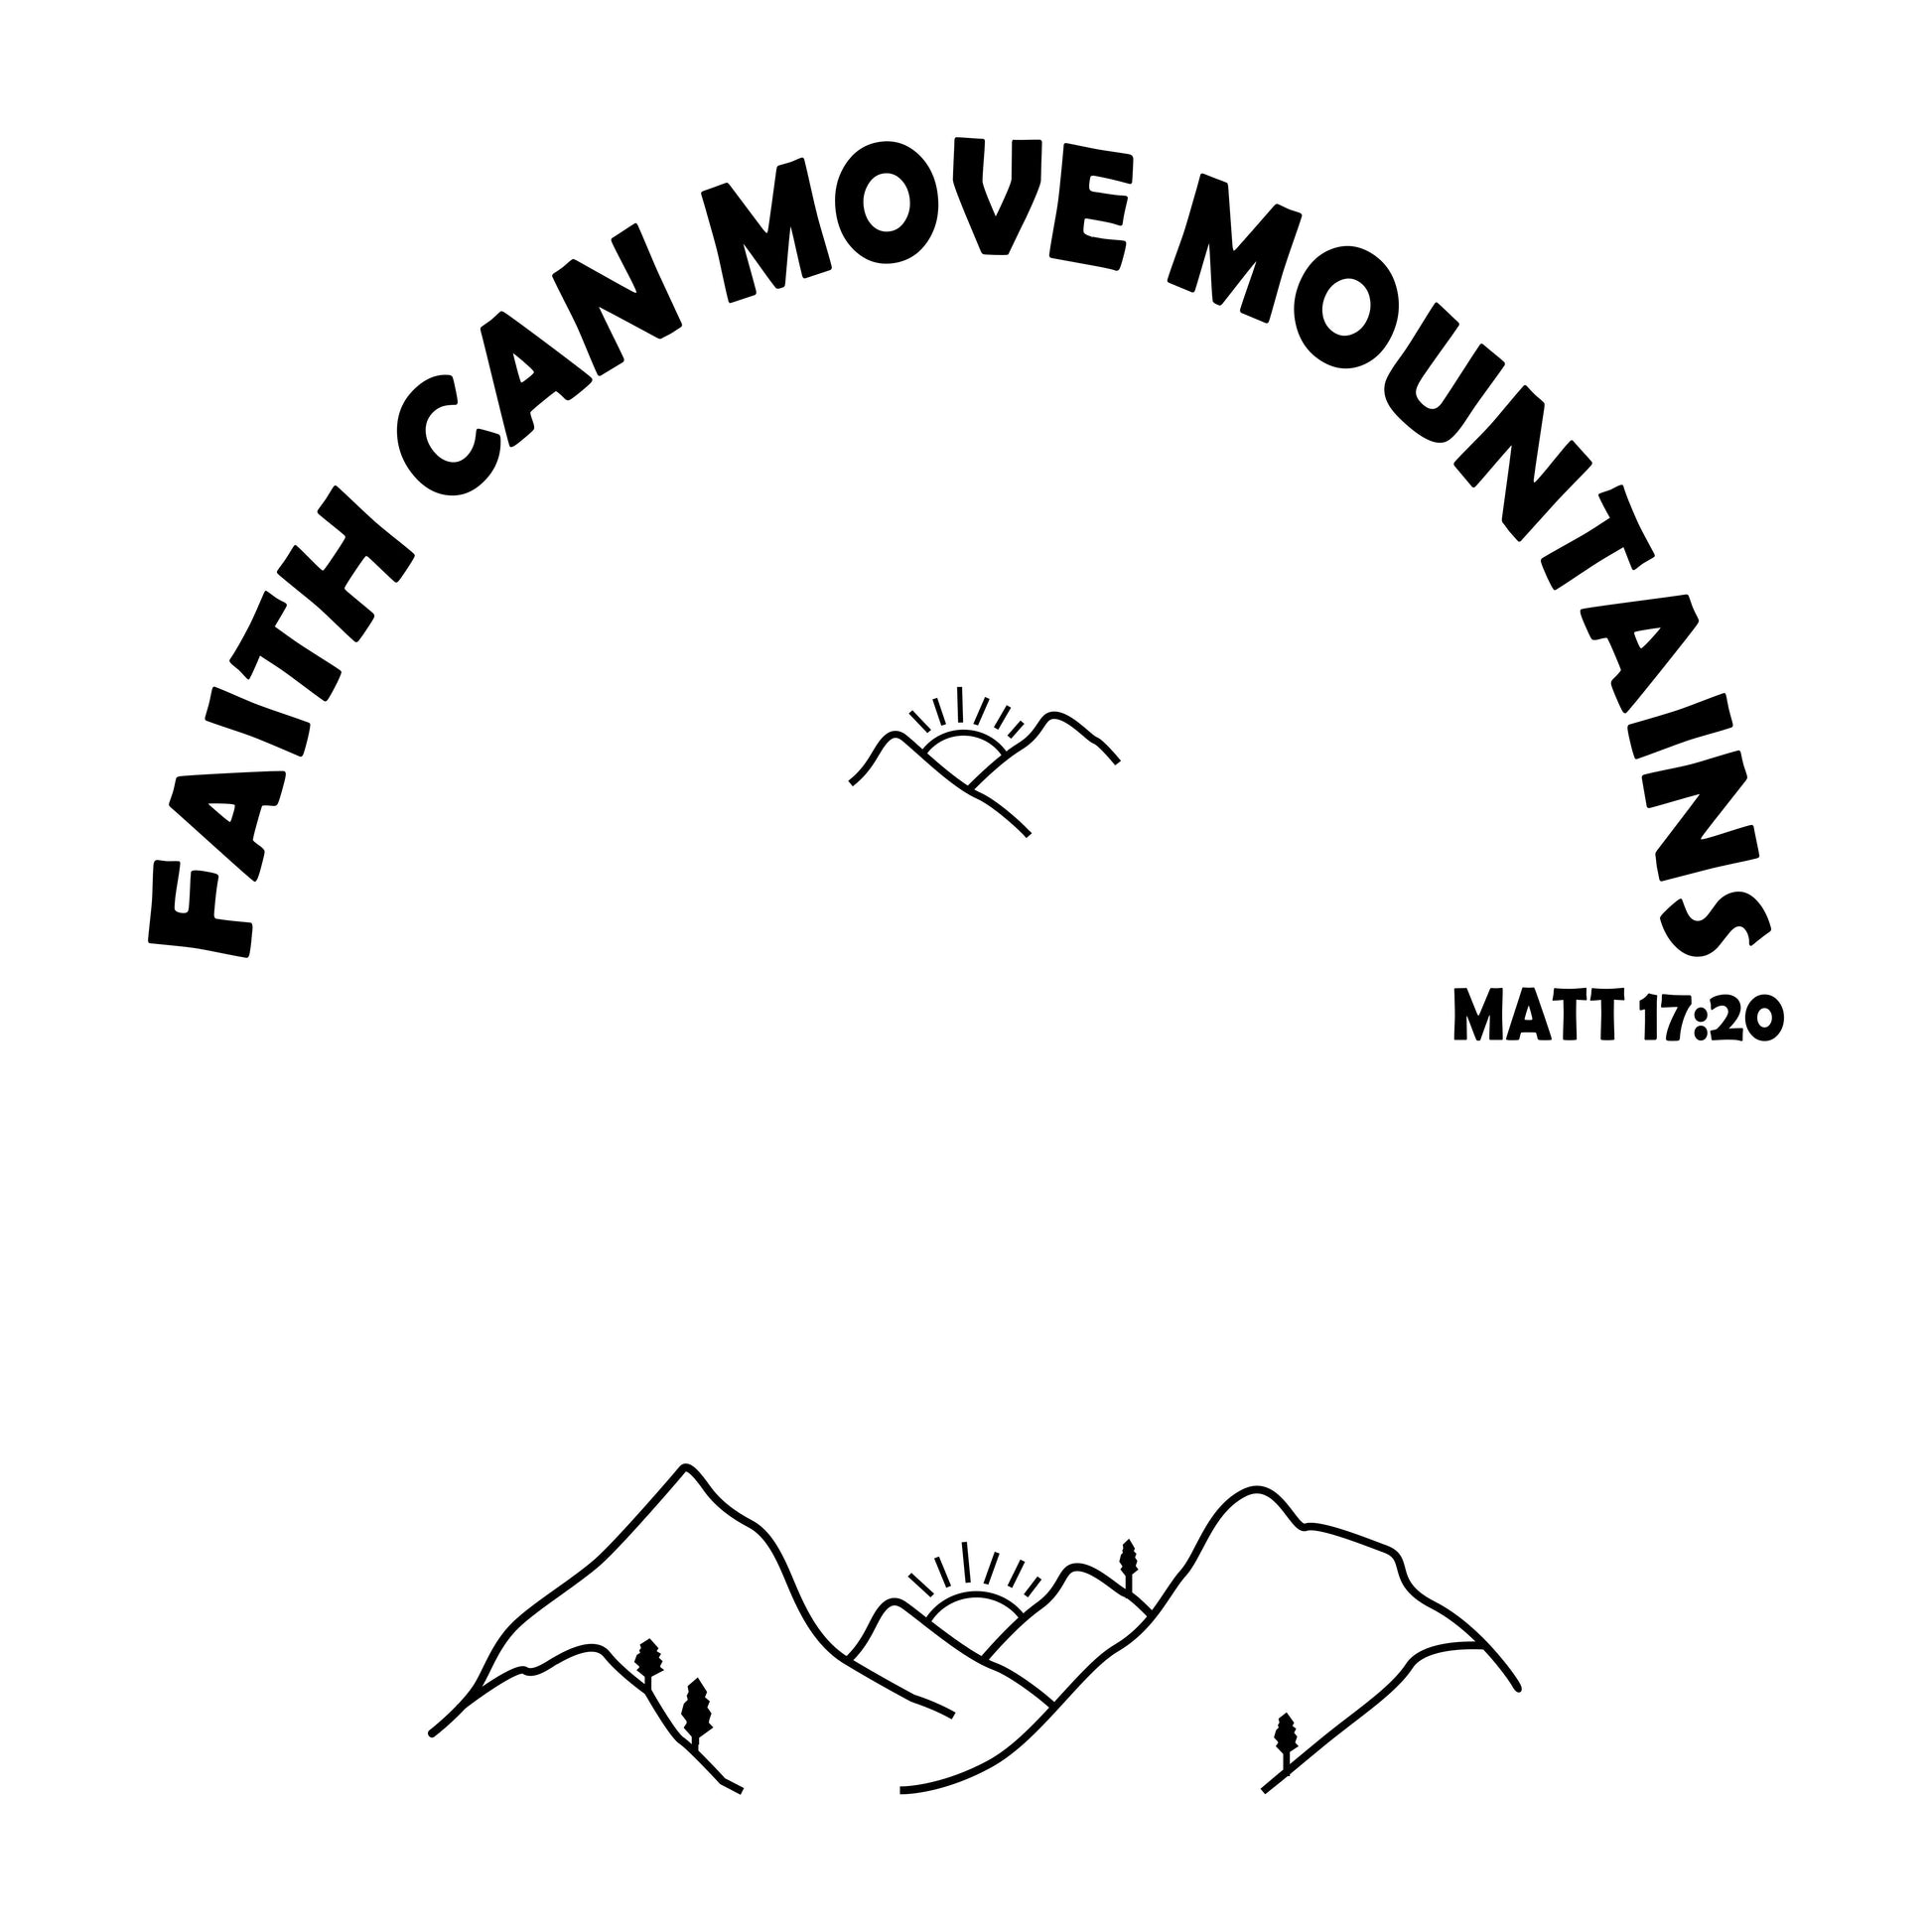 Faith Can Move Mountains hat burning design